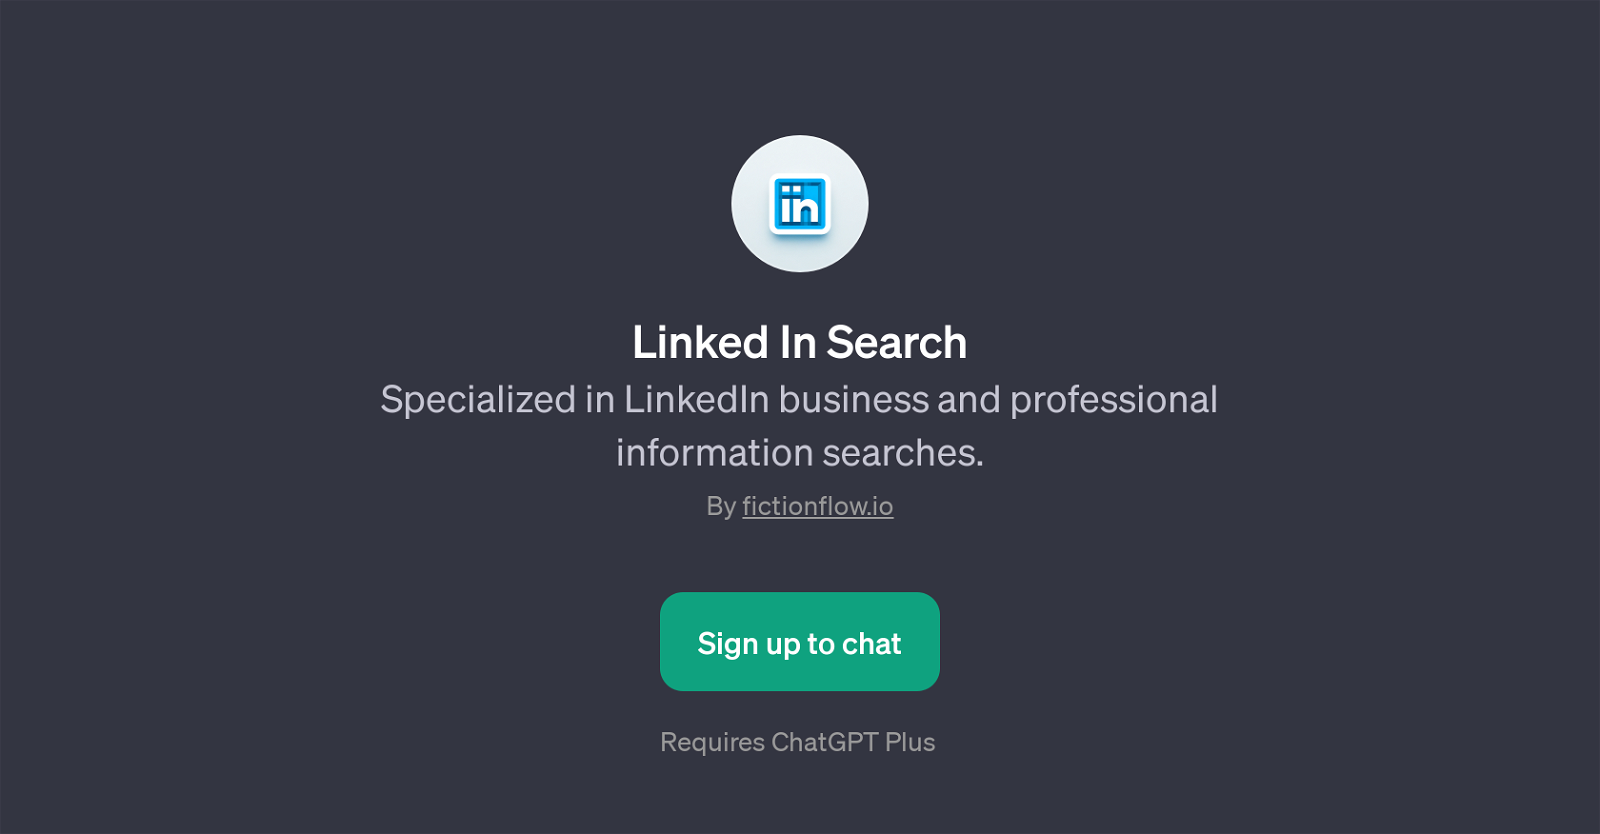 Linked In Search website